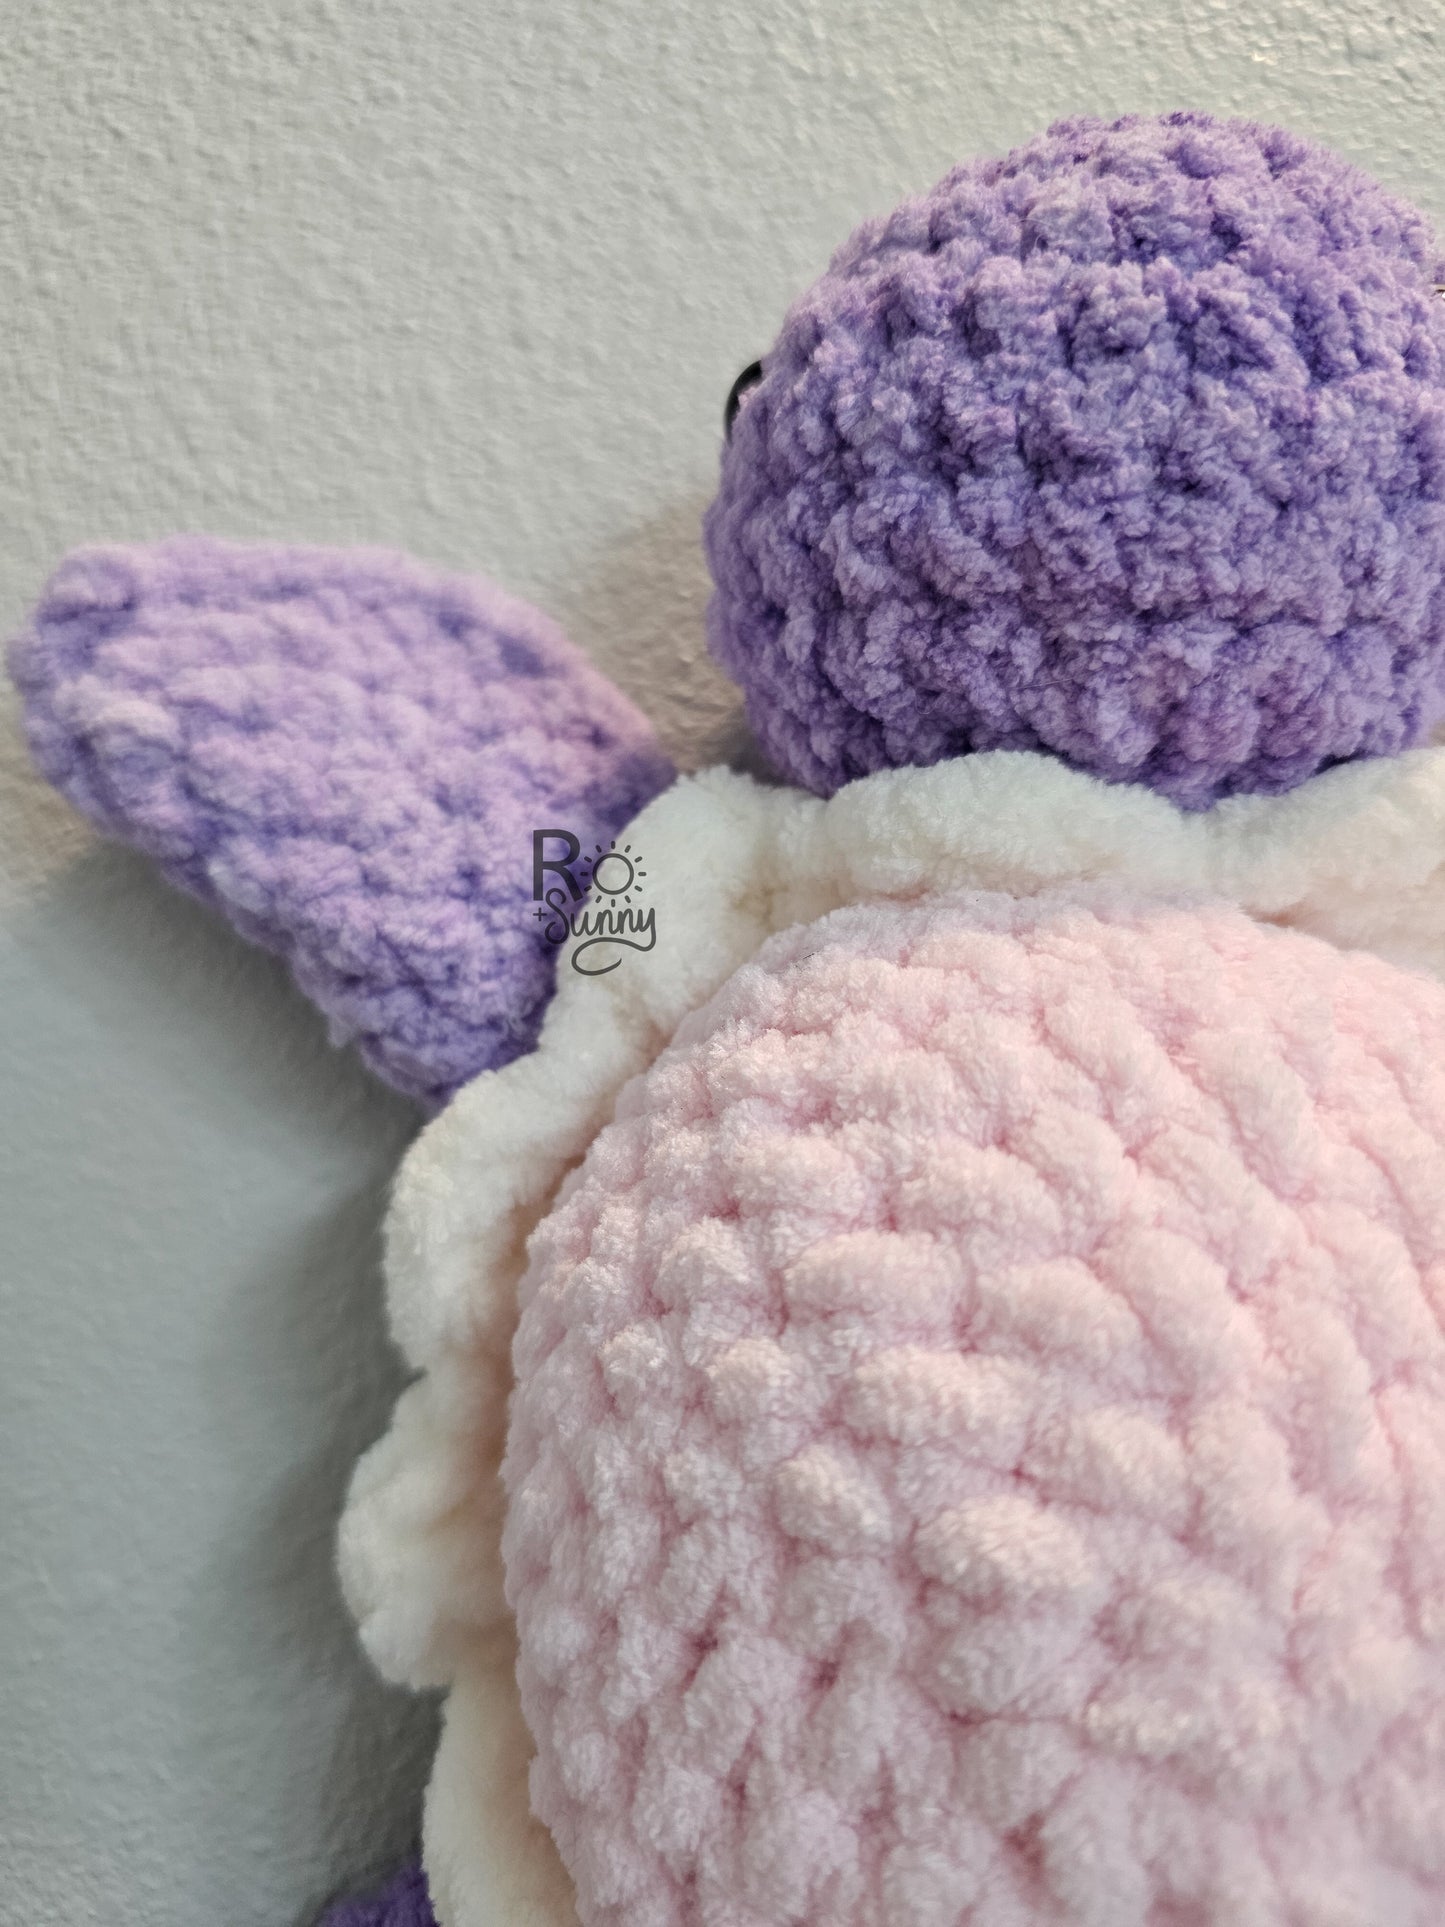 Cotton Candy, Closeup  - Crochet sea turtle with a purple body and light pink shell with that has a white ruffle. The belly of the turtle is a light teal color. 